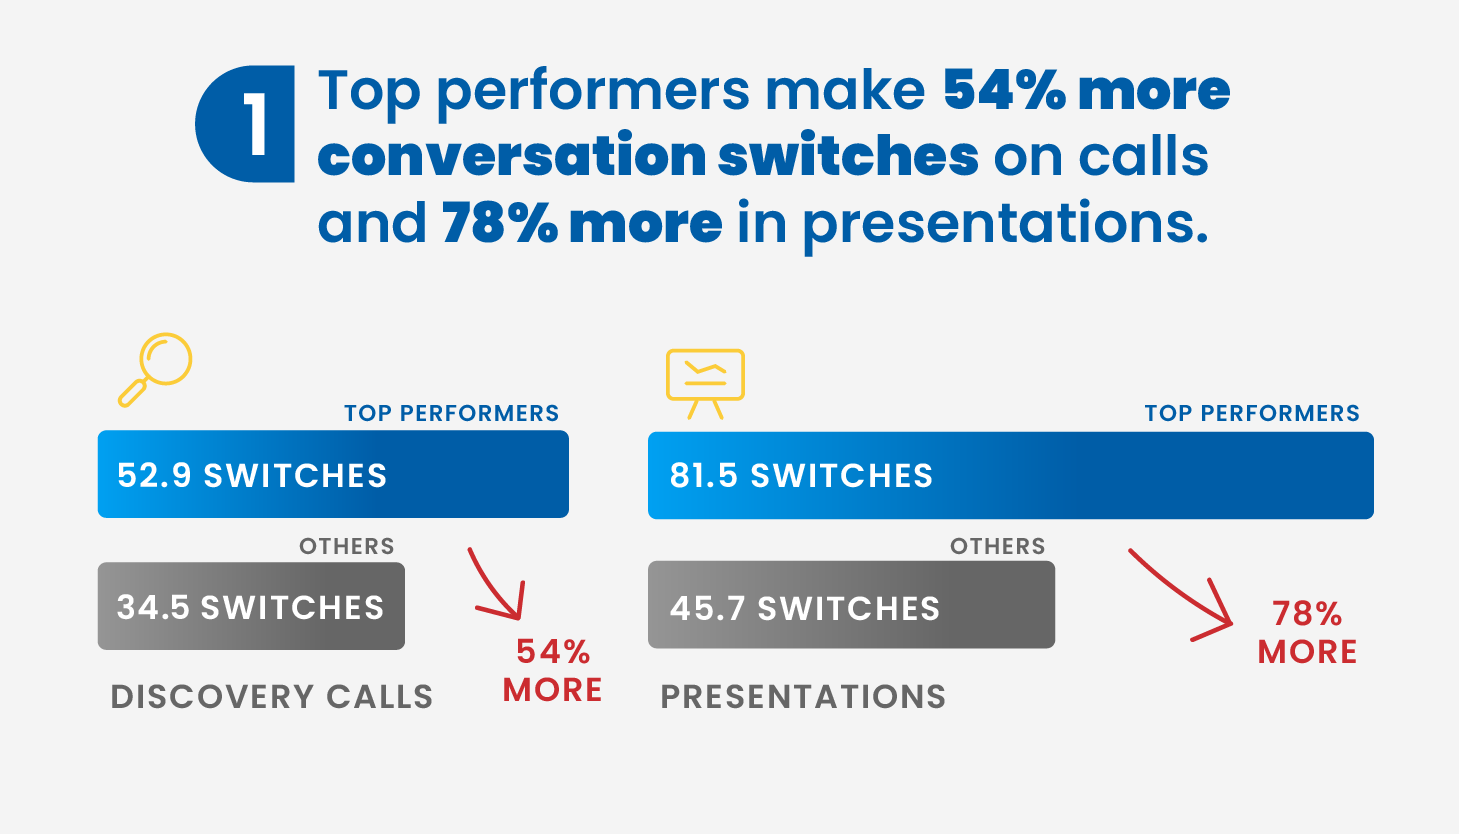 1. Top Performers make 54% more conversation switches on calls and 78% more in presentations